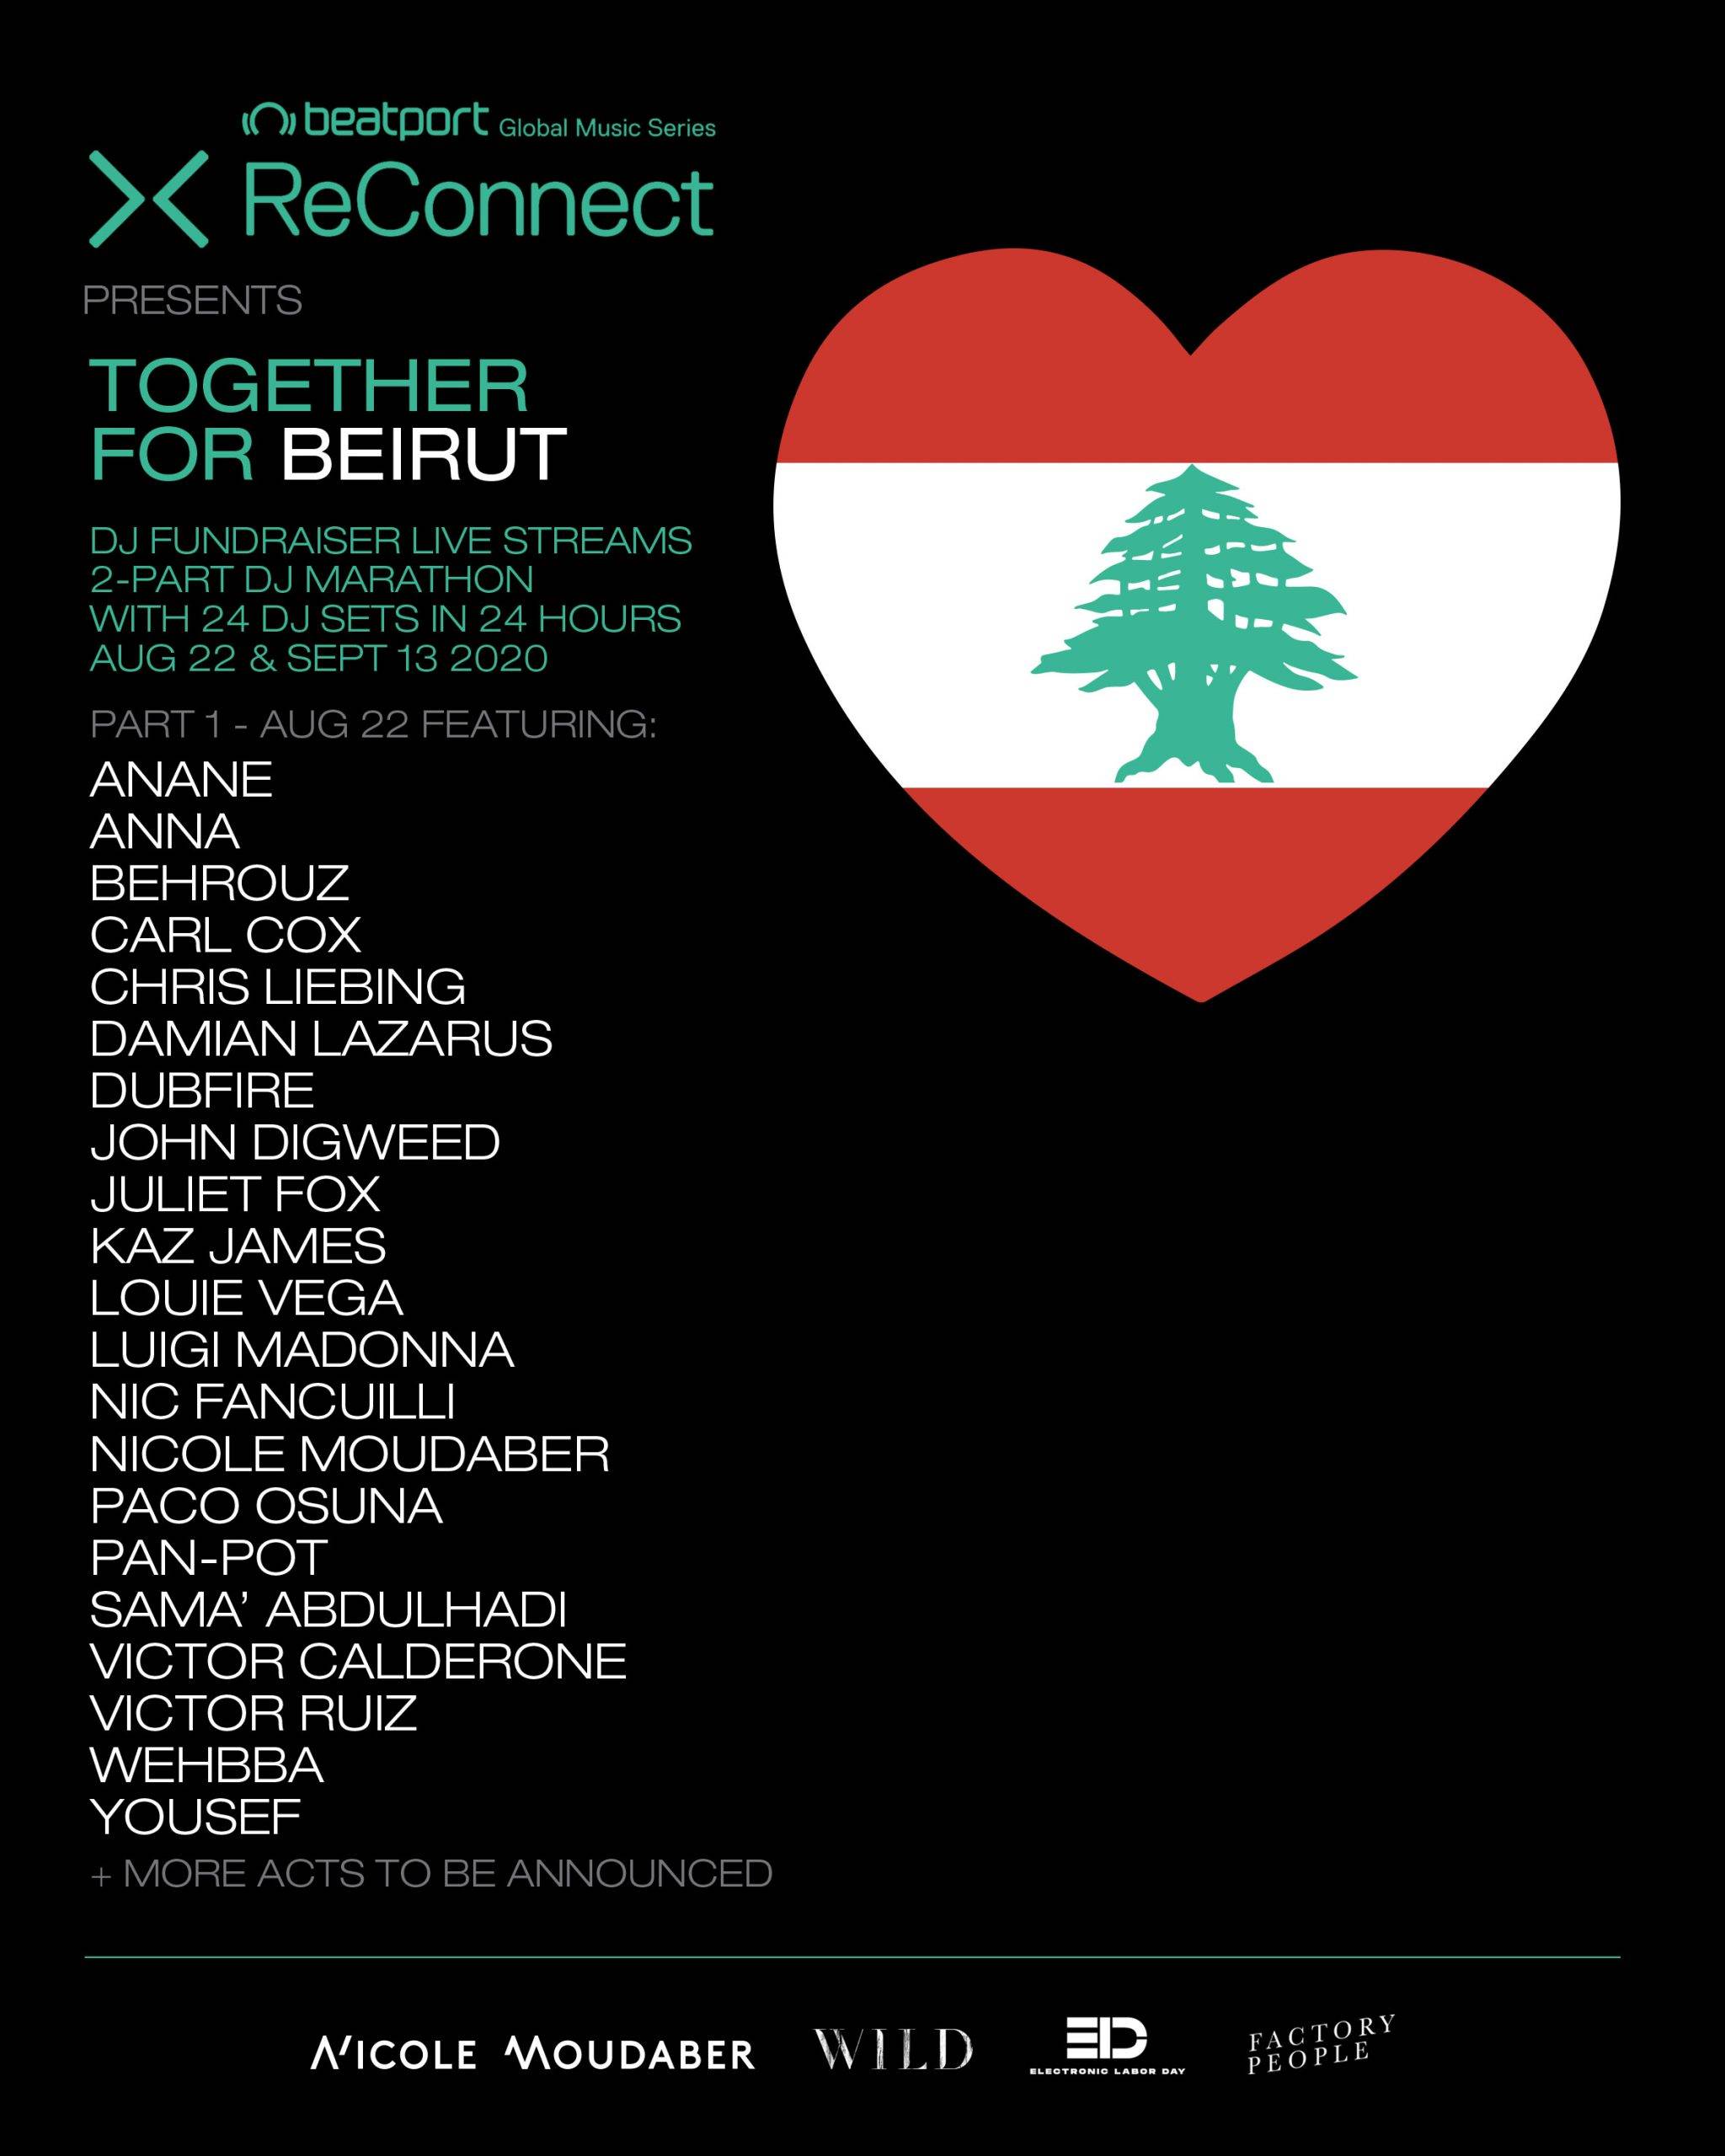 Beatport Reconnect for Beirut